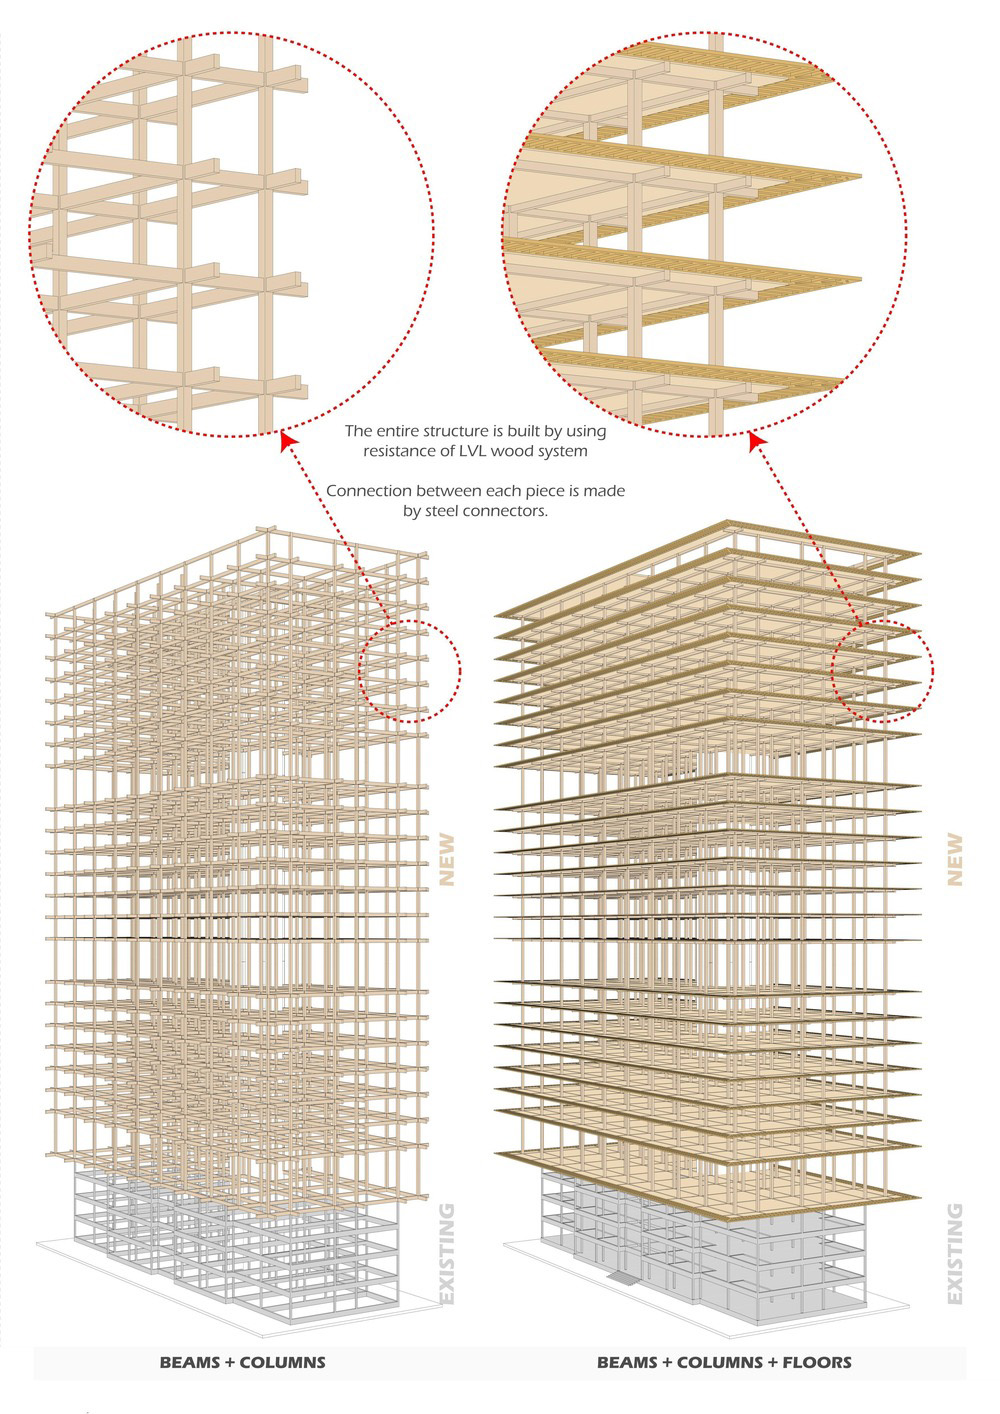 Study of the structure and zoom on the nodes of a wooden tower